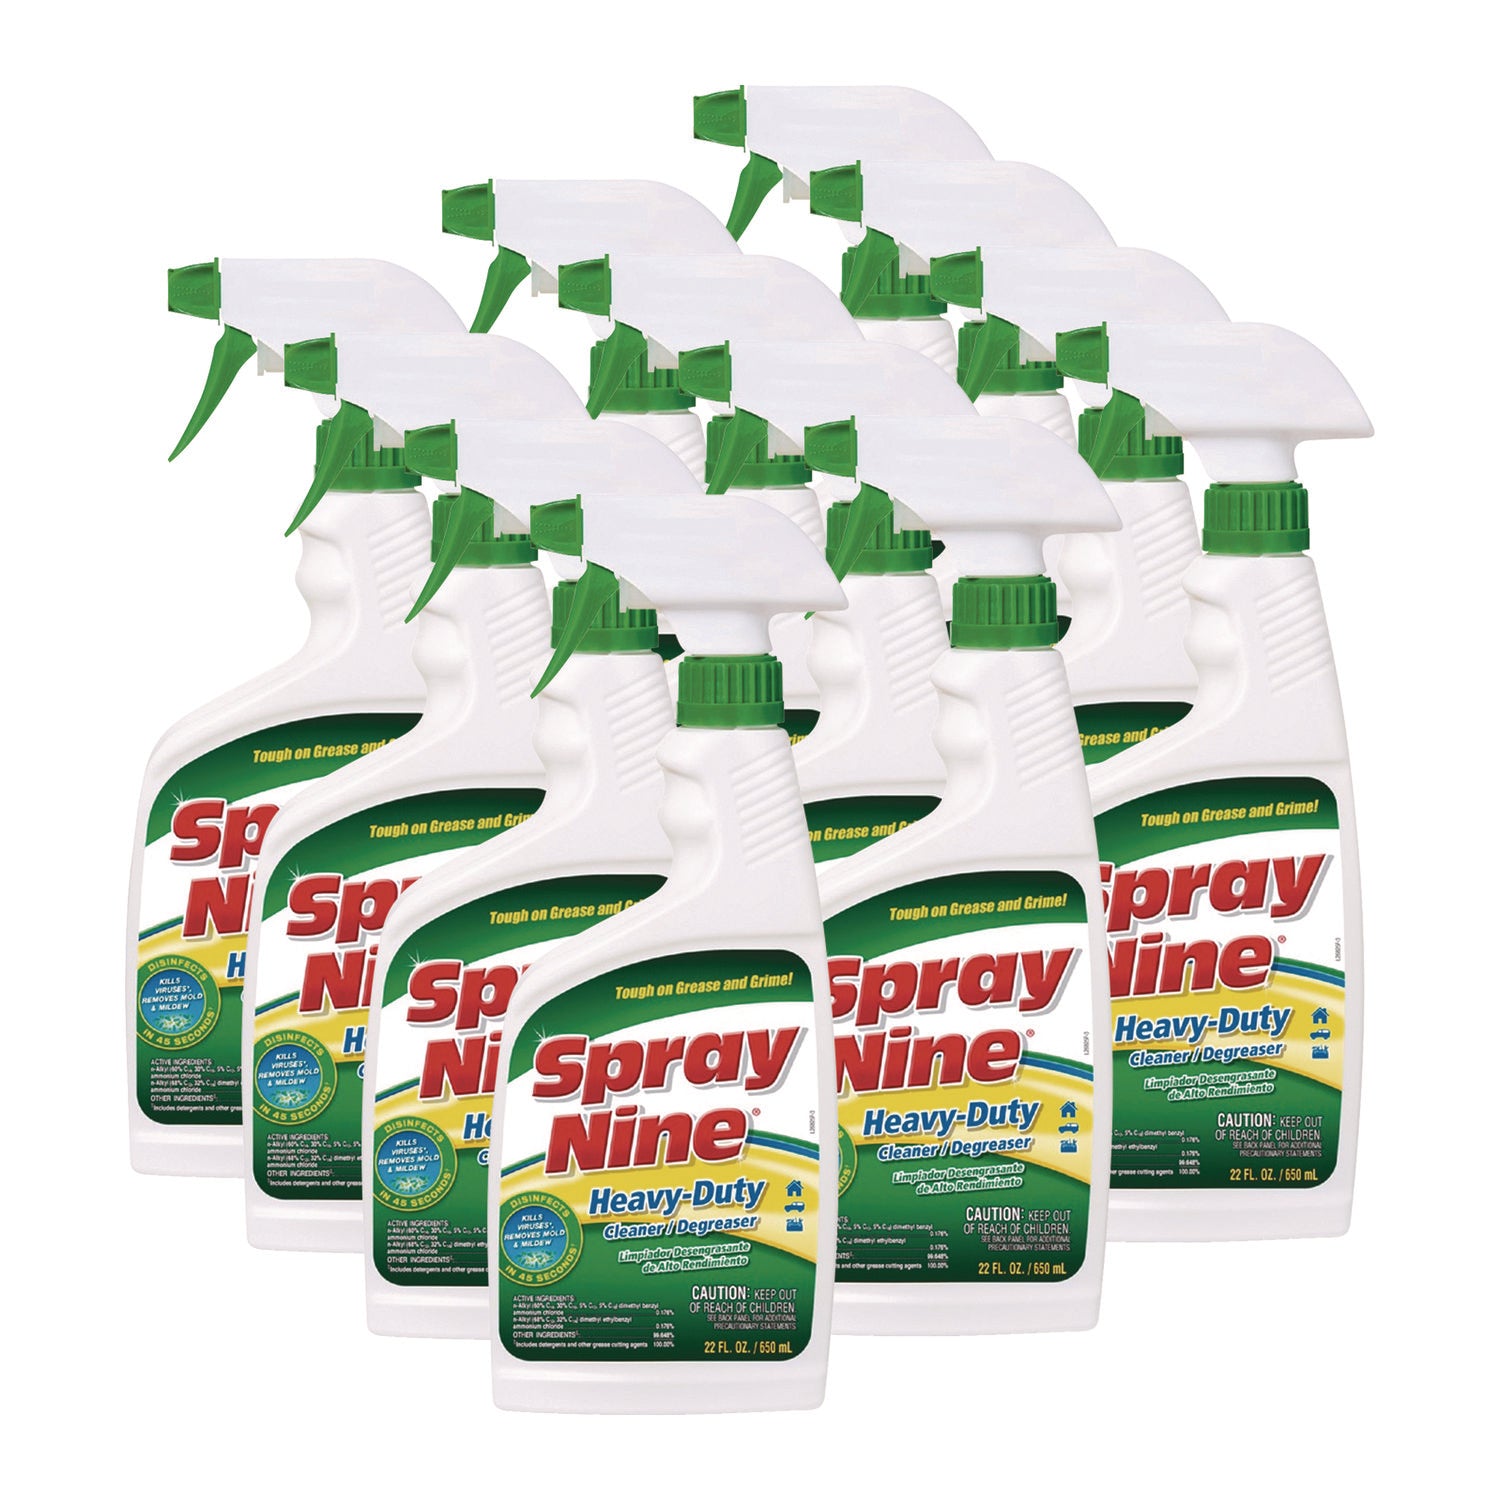 heavy-duty-cleaner-degreaser-disinfectant-citrus-scent-22-oz-trigger-spray-bottle-12-carton_itw26825 - 1